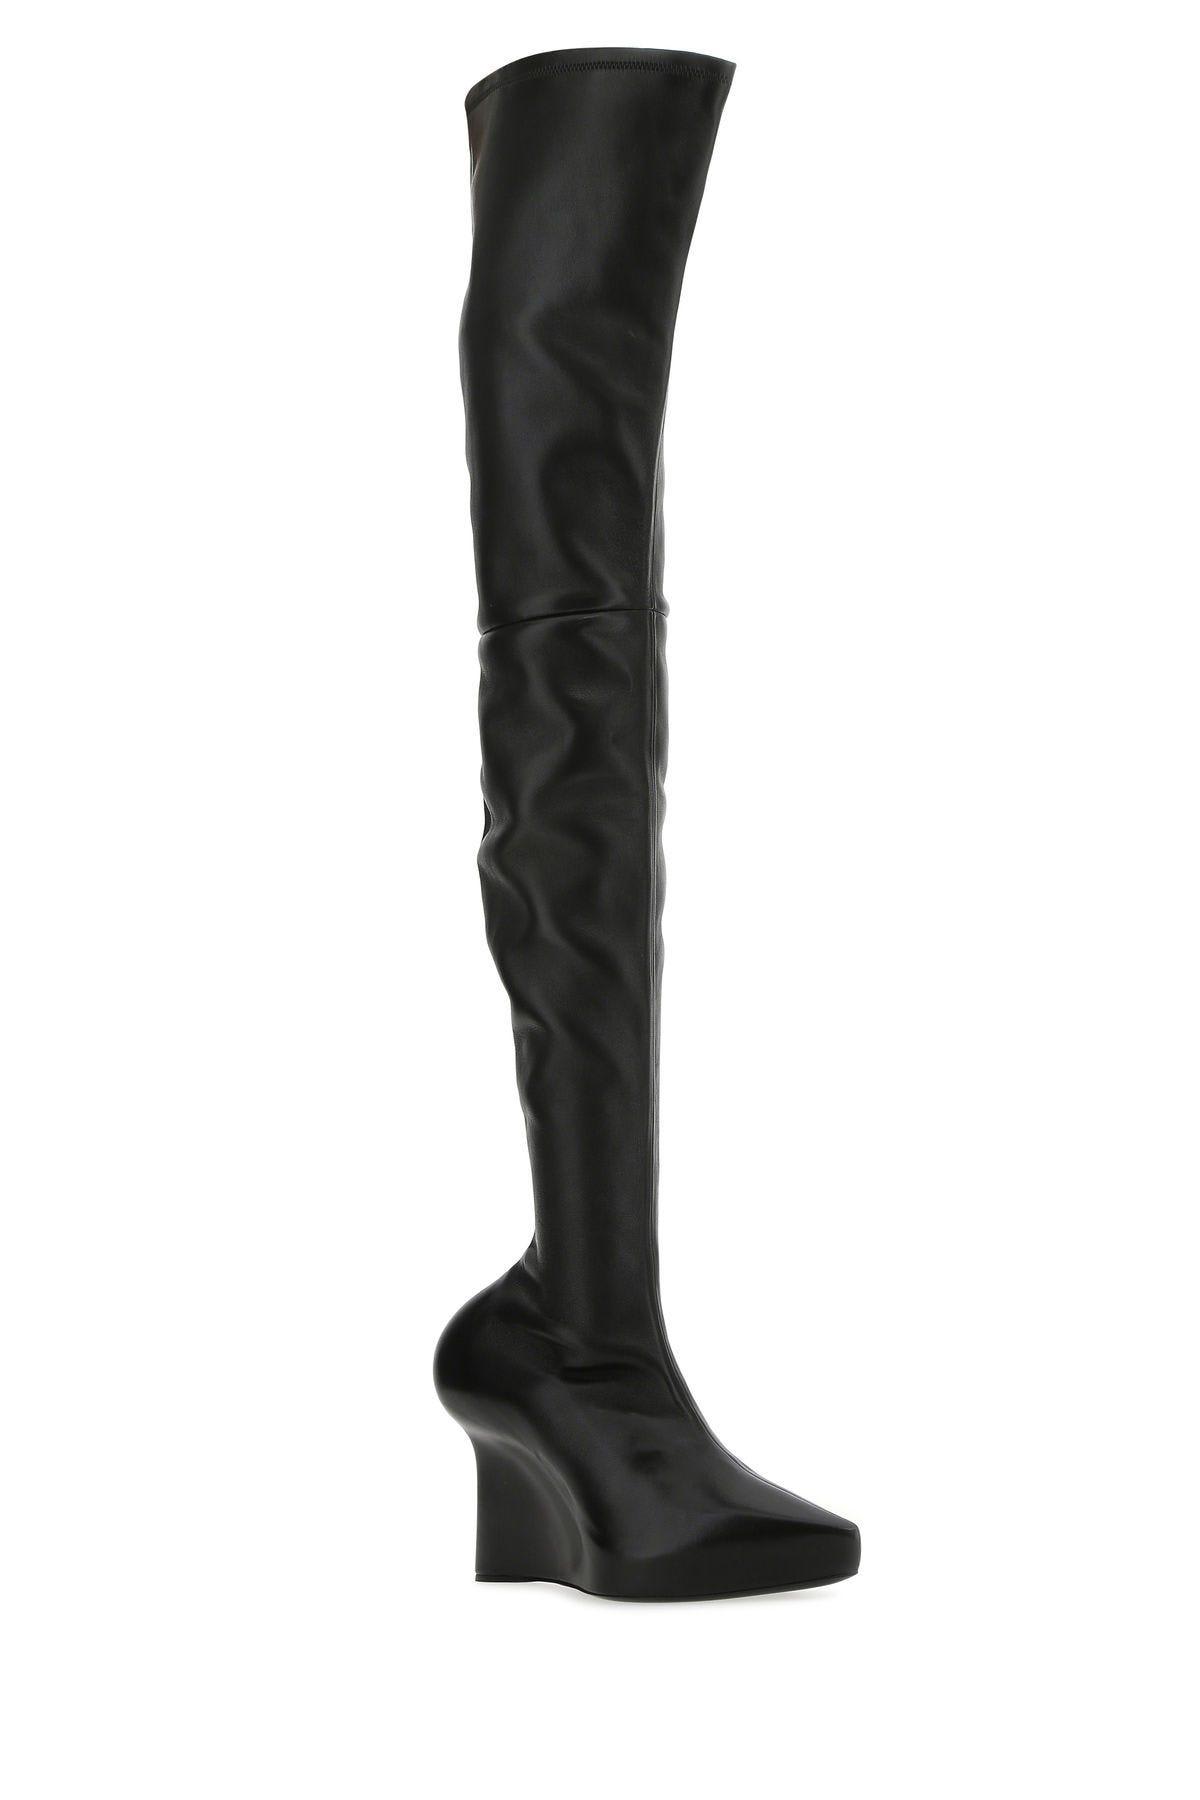 Shop Givenchy Black Nappa Leather Show Boots